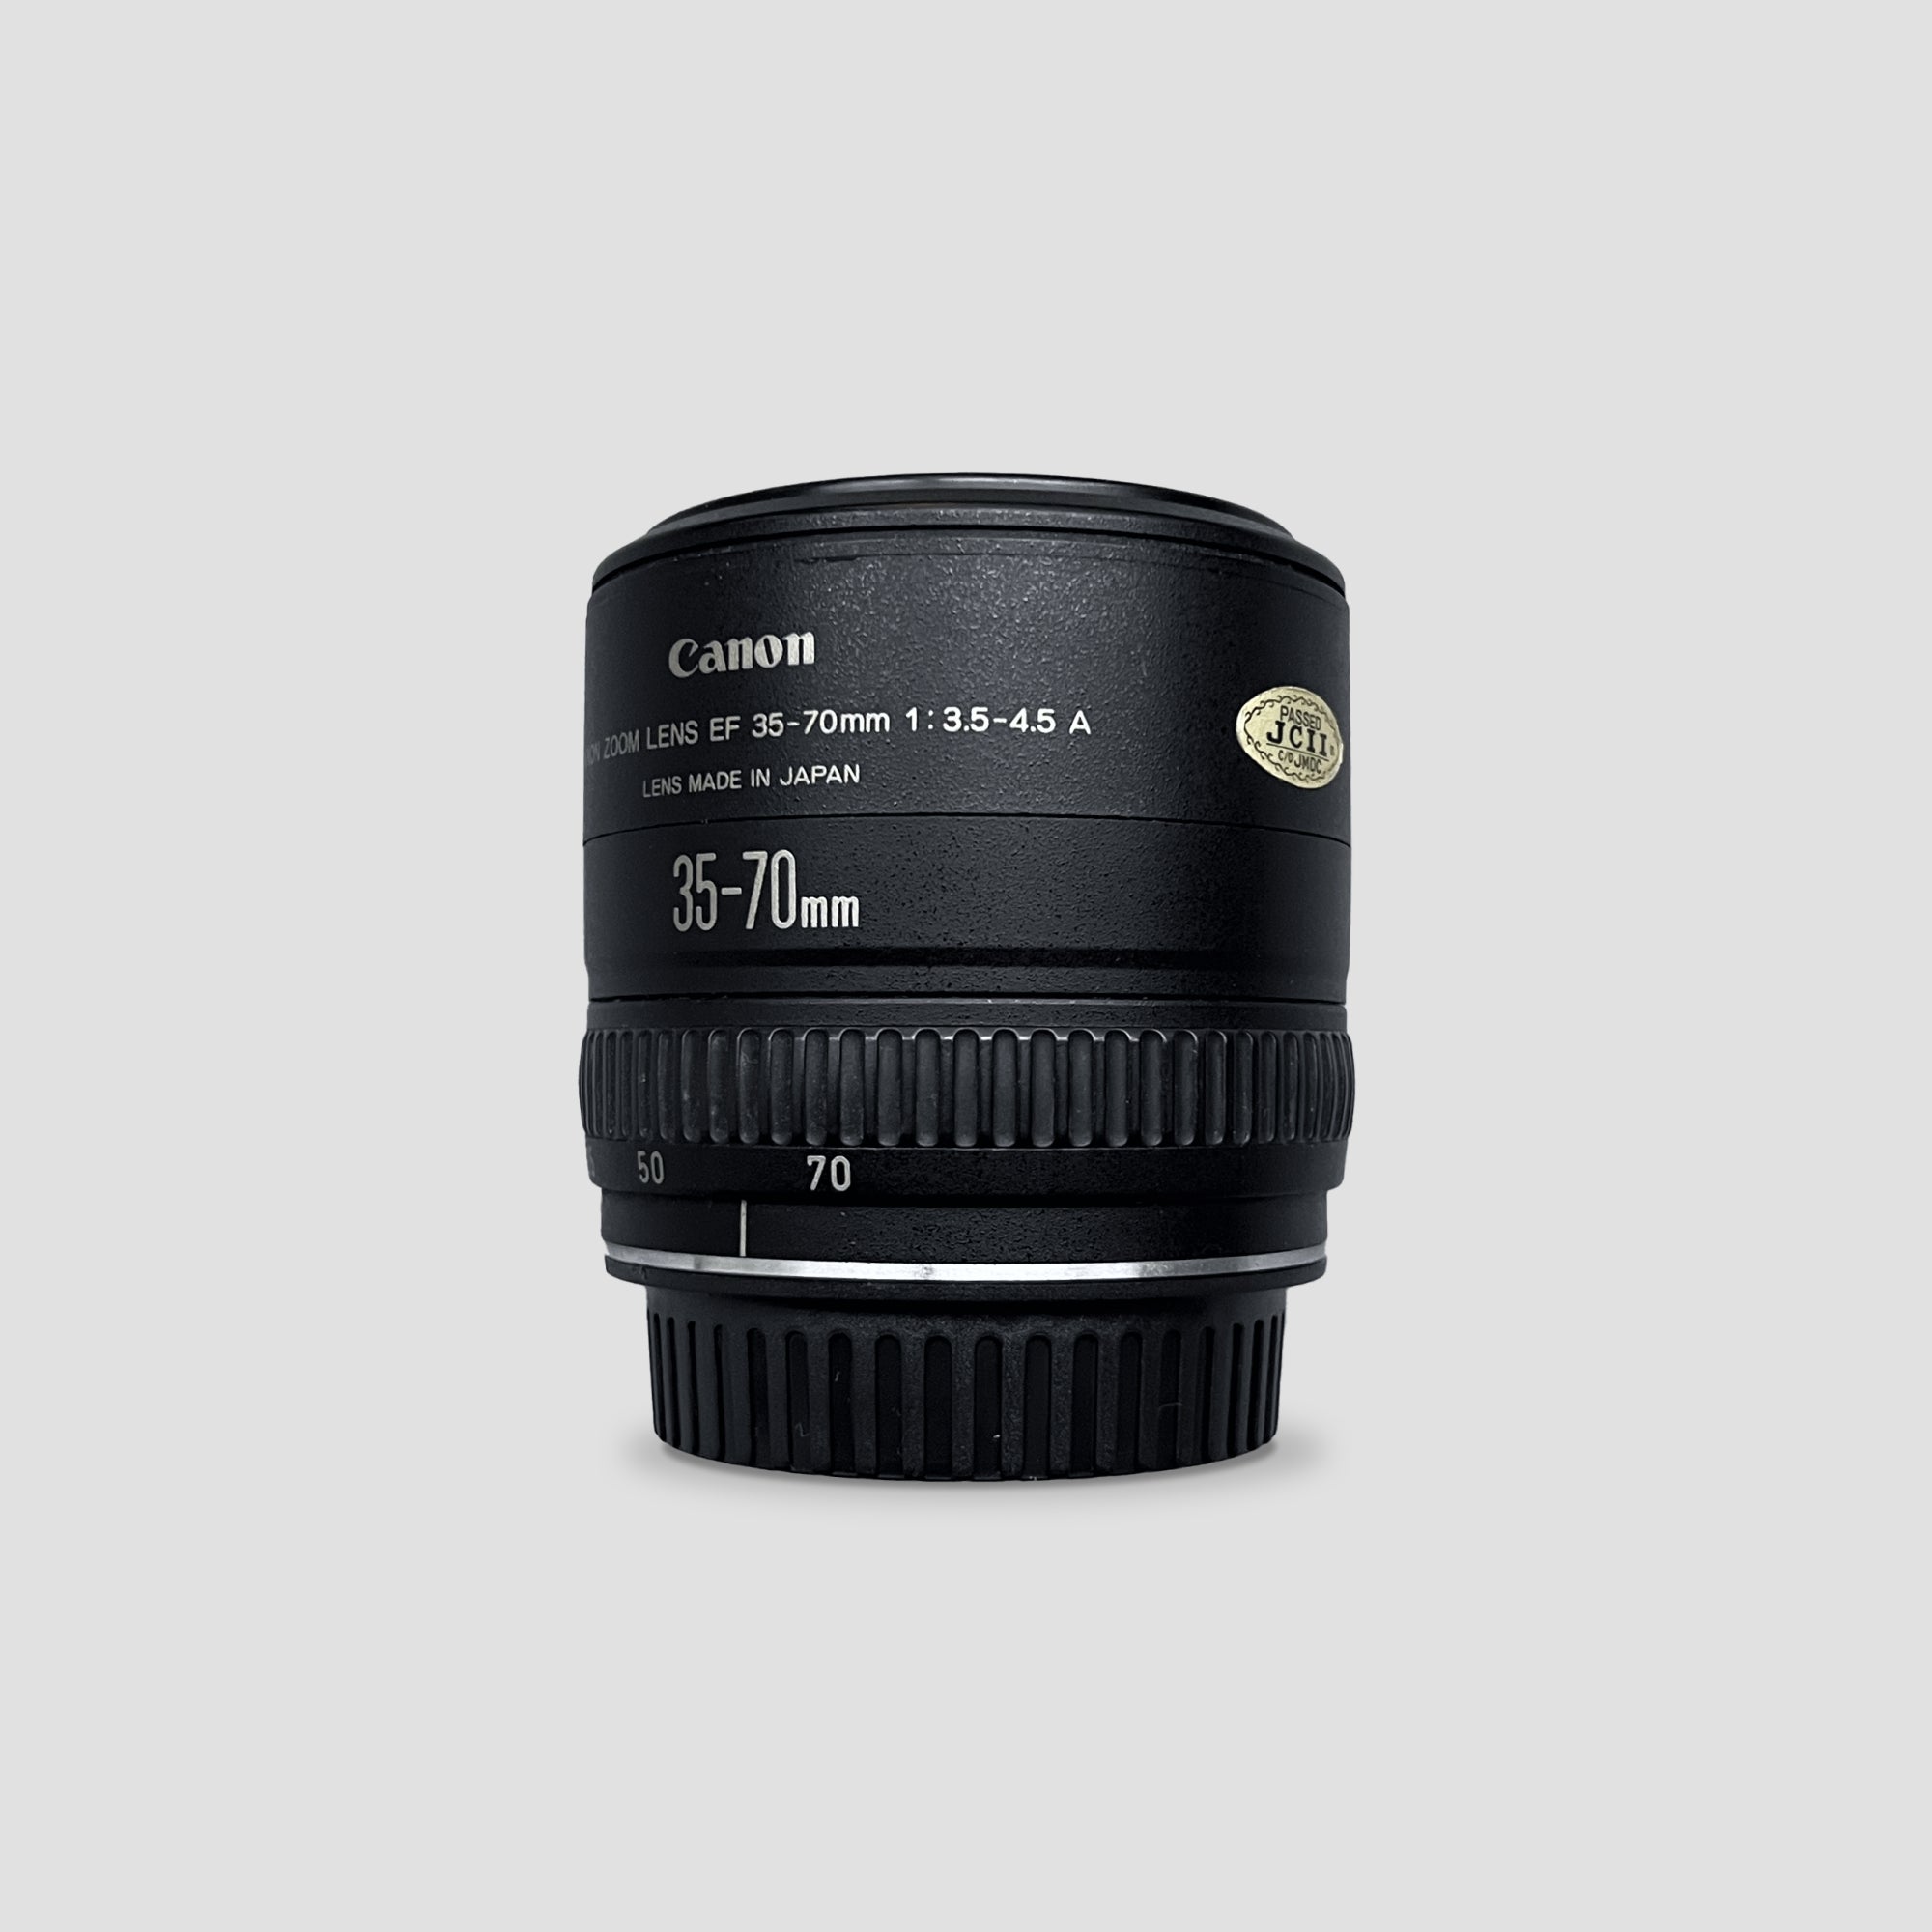 Canon EF 35-70mm 1:3.5-4.5 A